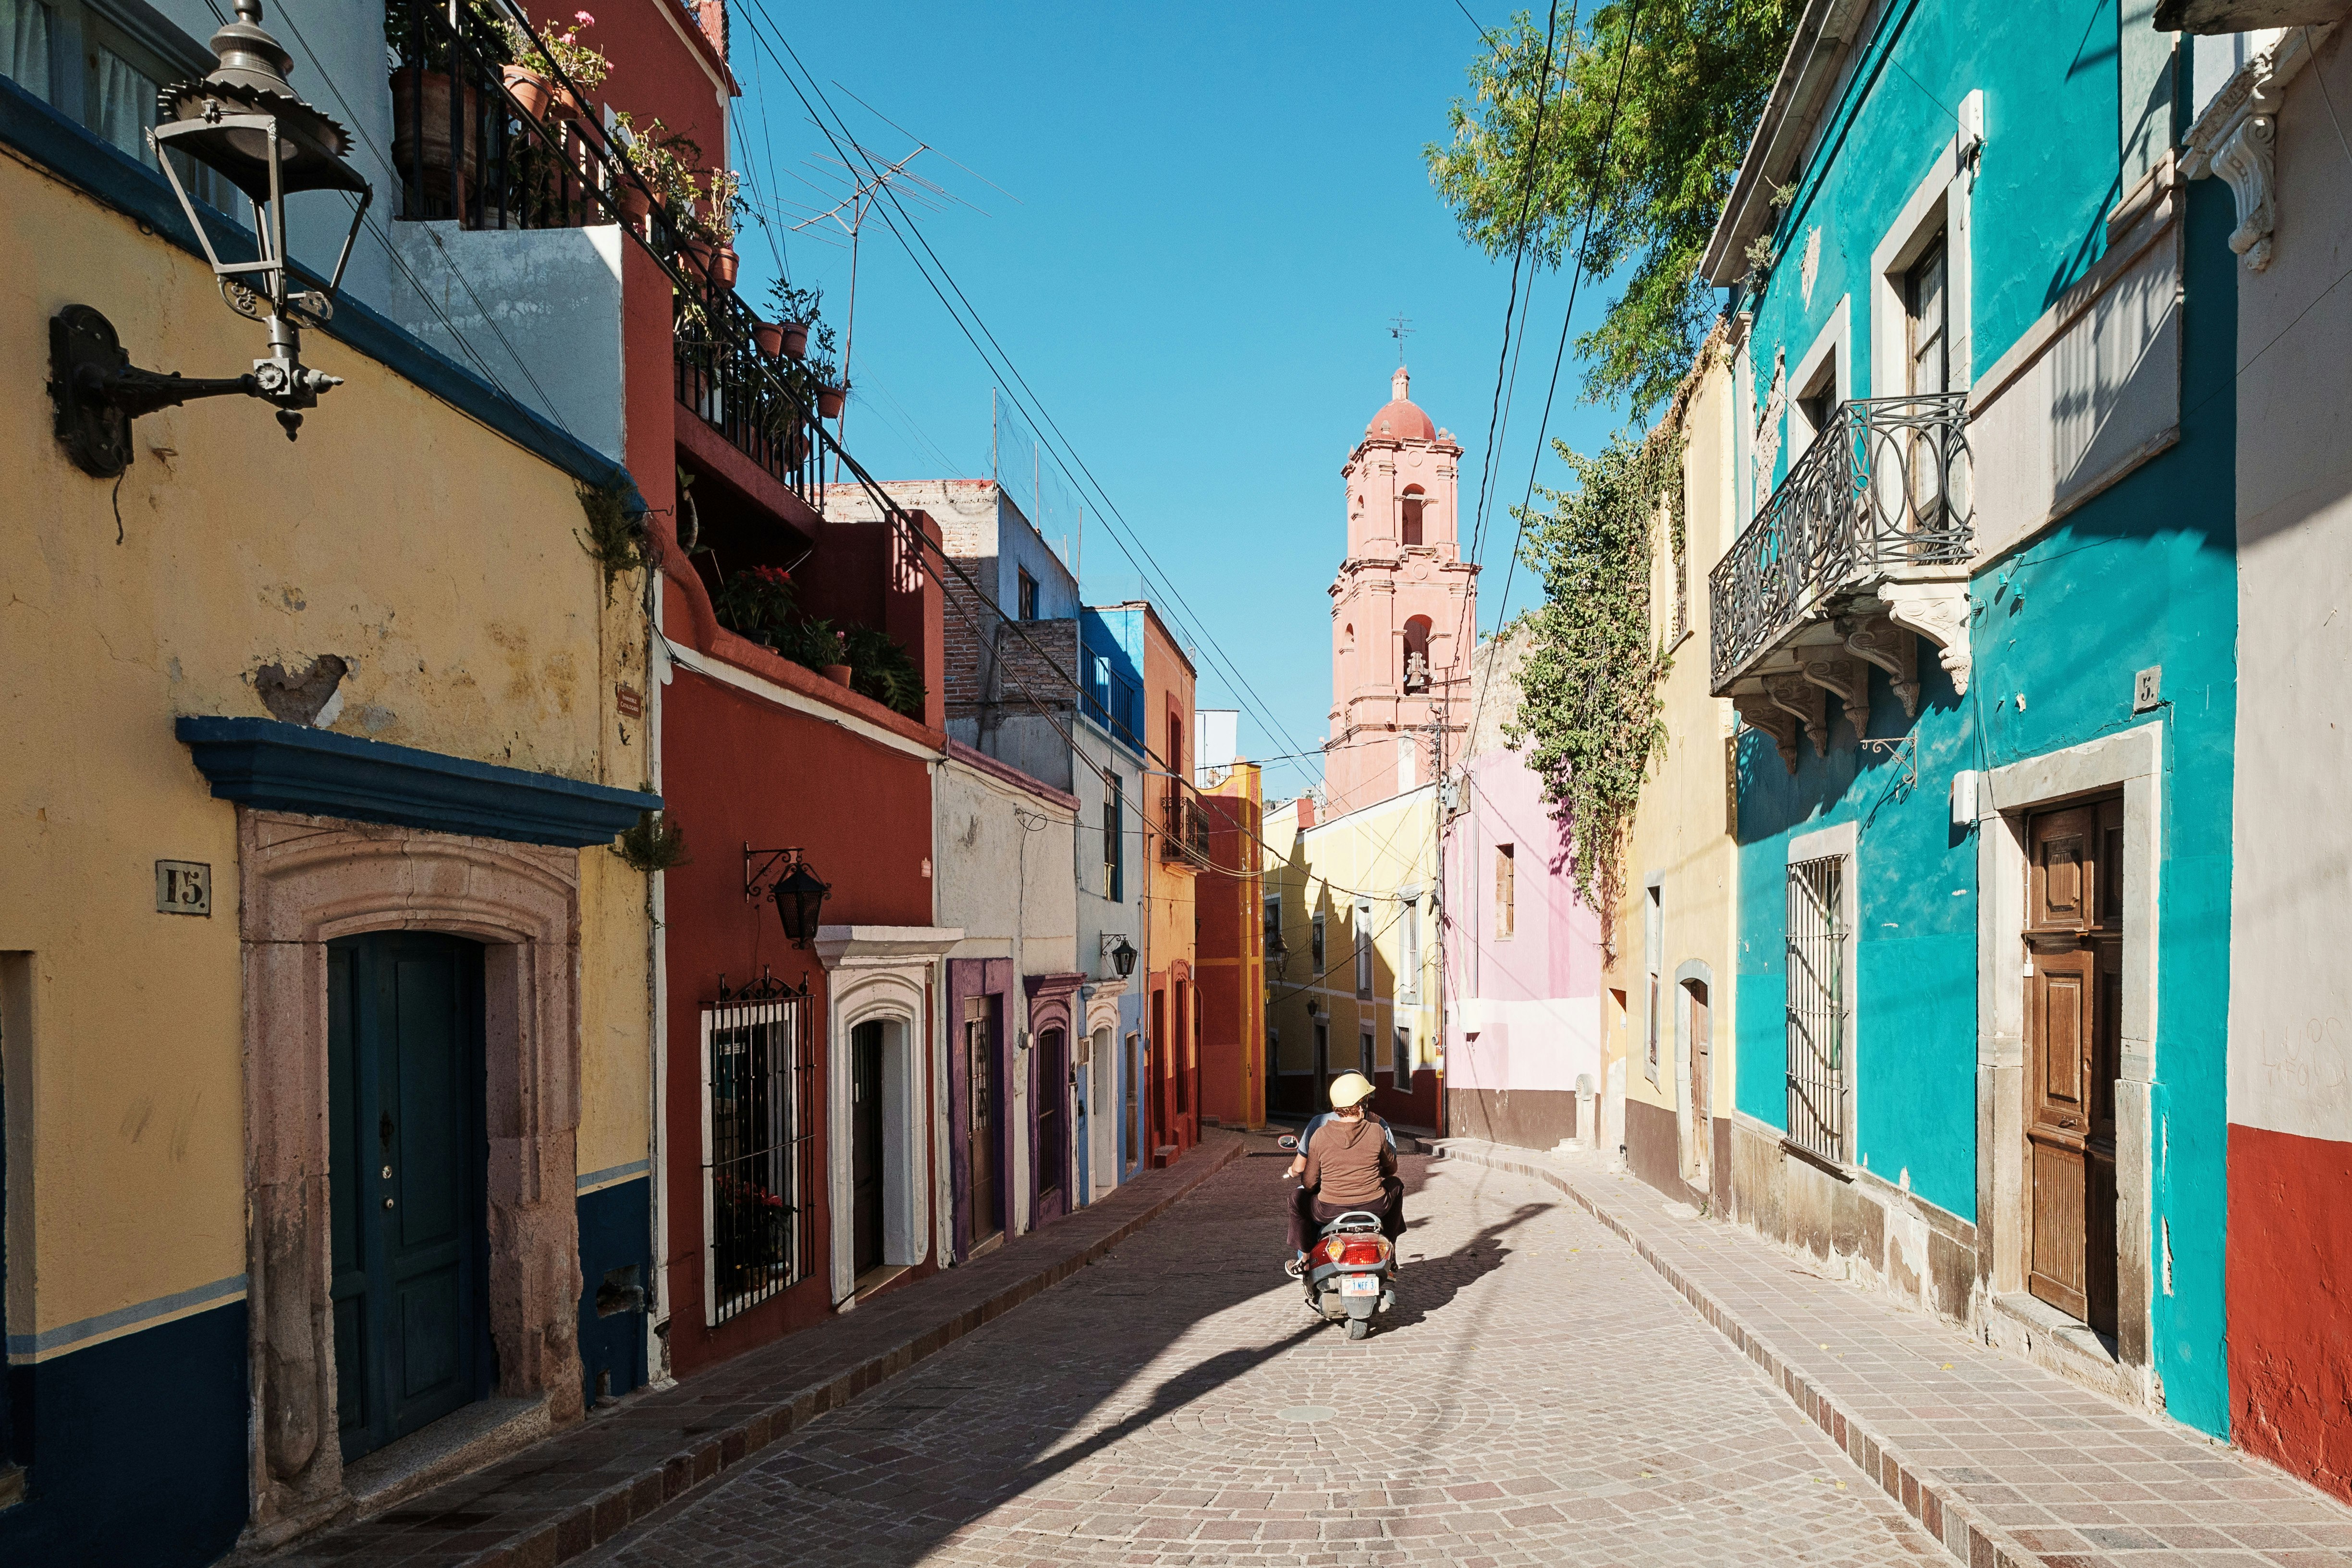 2 people leave on a motorbike on a cobblestone road with colorful homes on either side. The historic Town of Guanajuato is listed as a UNESCO World Heritage Site